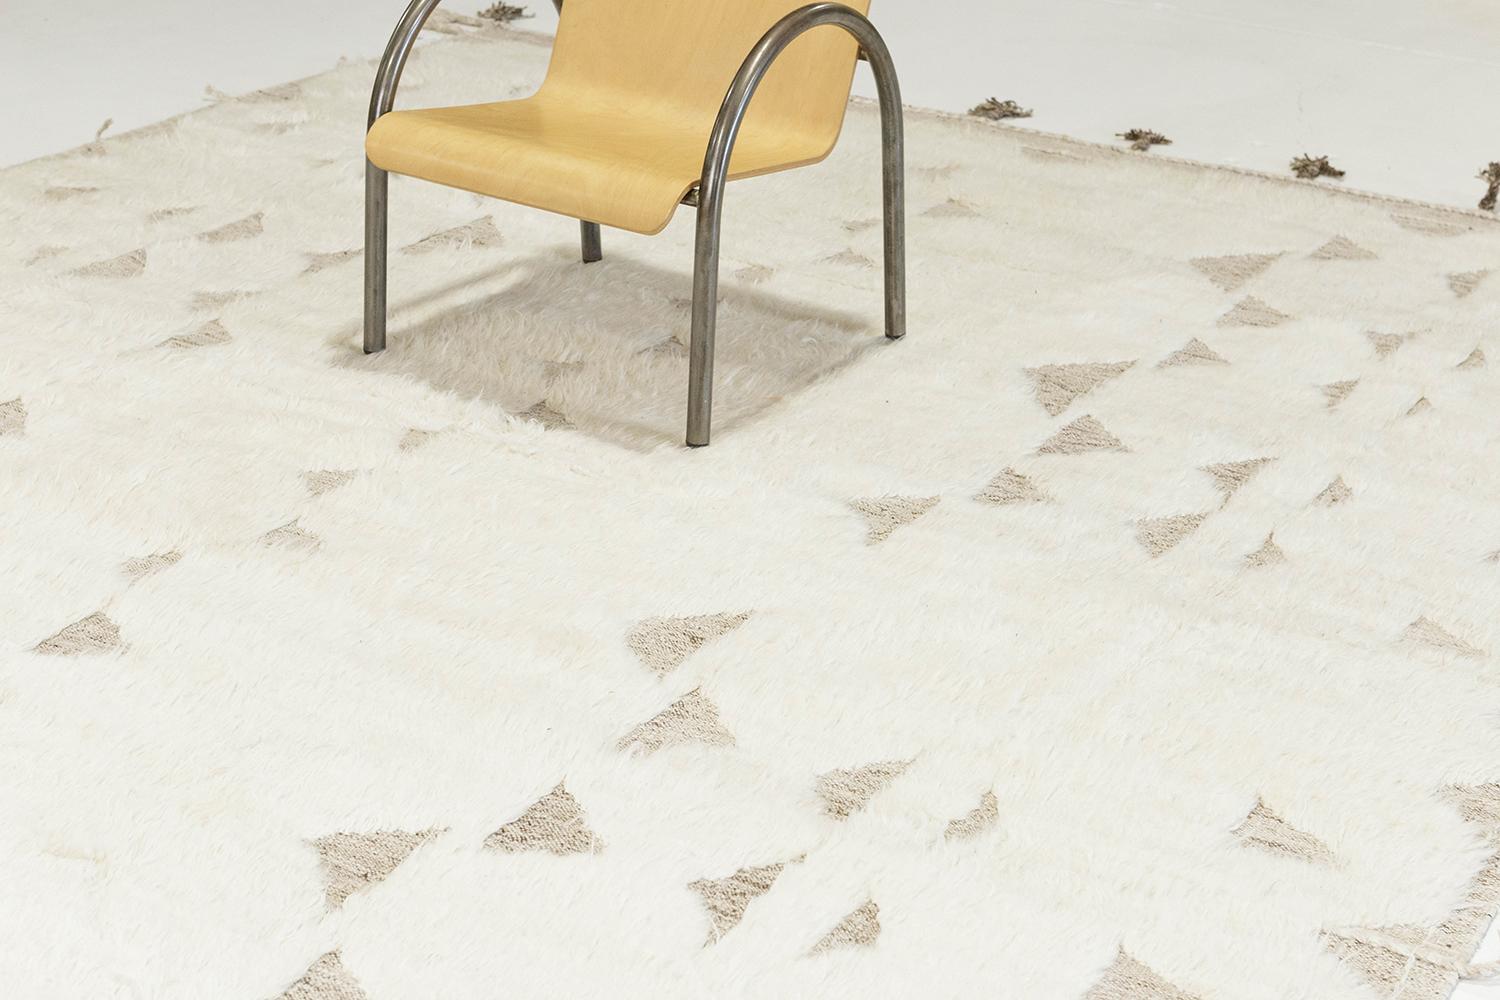 'Gimbrala' is a stunning handwoven rug with gray embossed triangle detailing surrounded by the perfect white pile. Beautiful tassels and bordered designs add a timely and one of a kind essence for the modern design world. Haute Bohemian Collection: